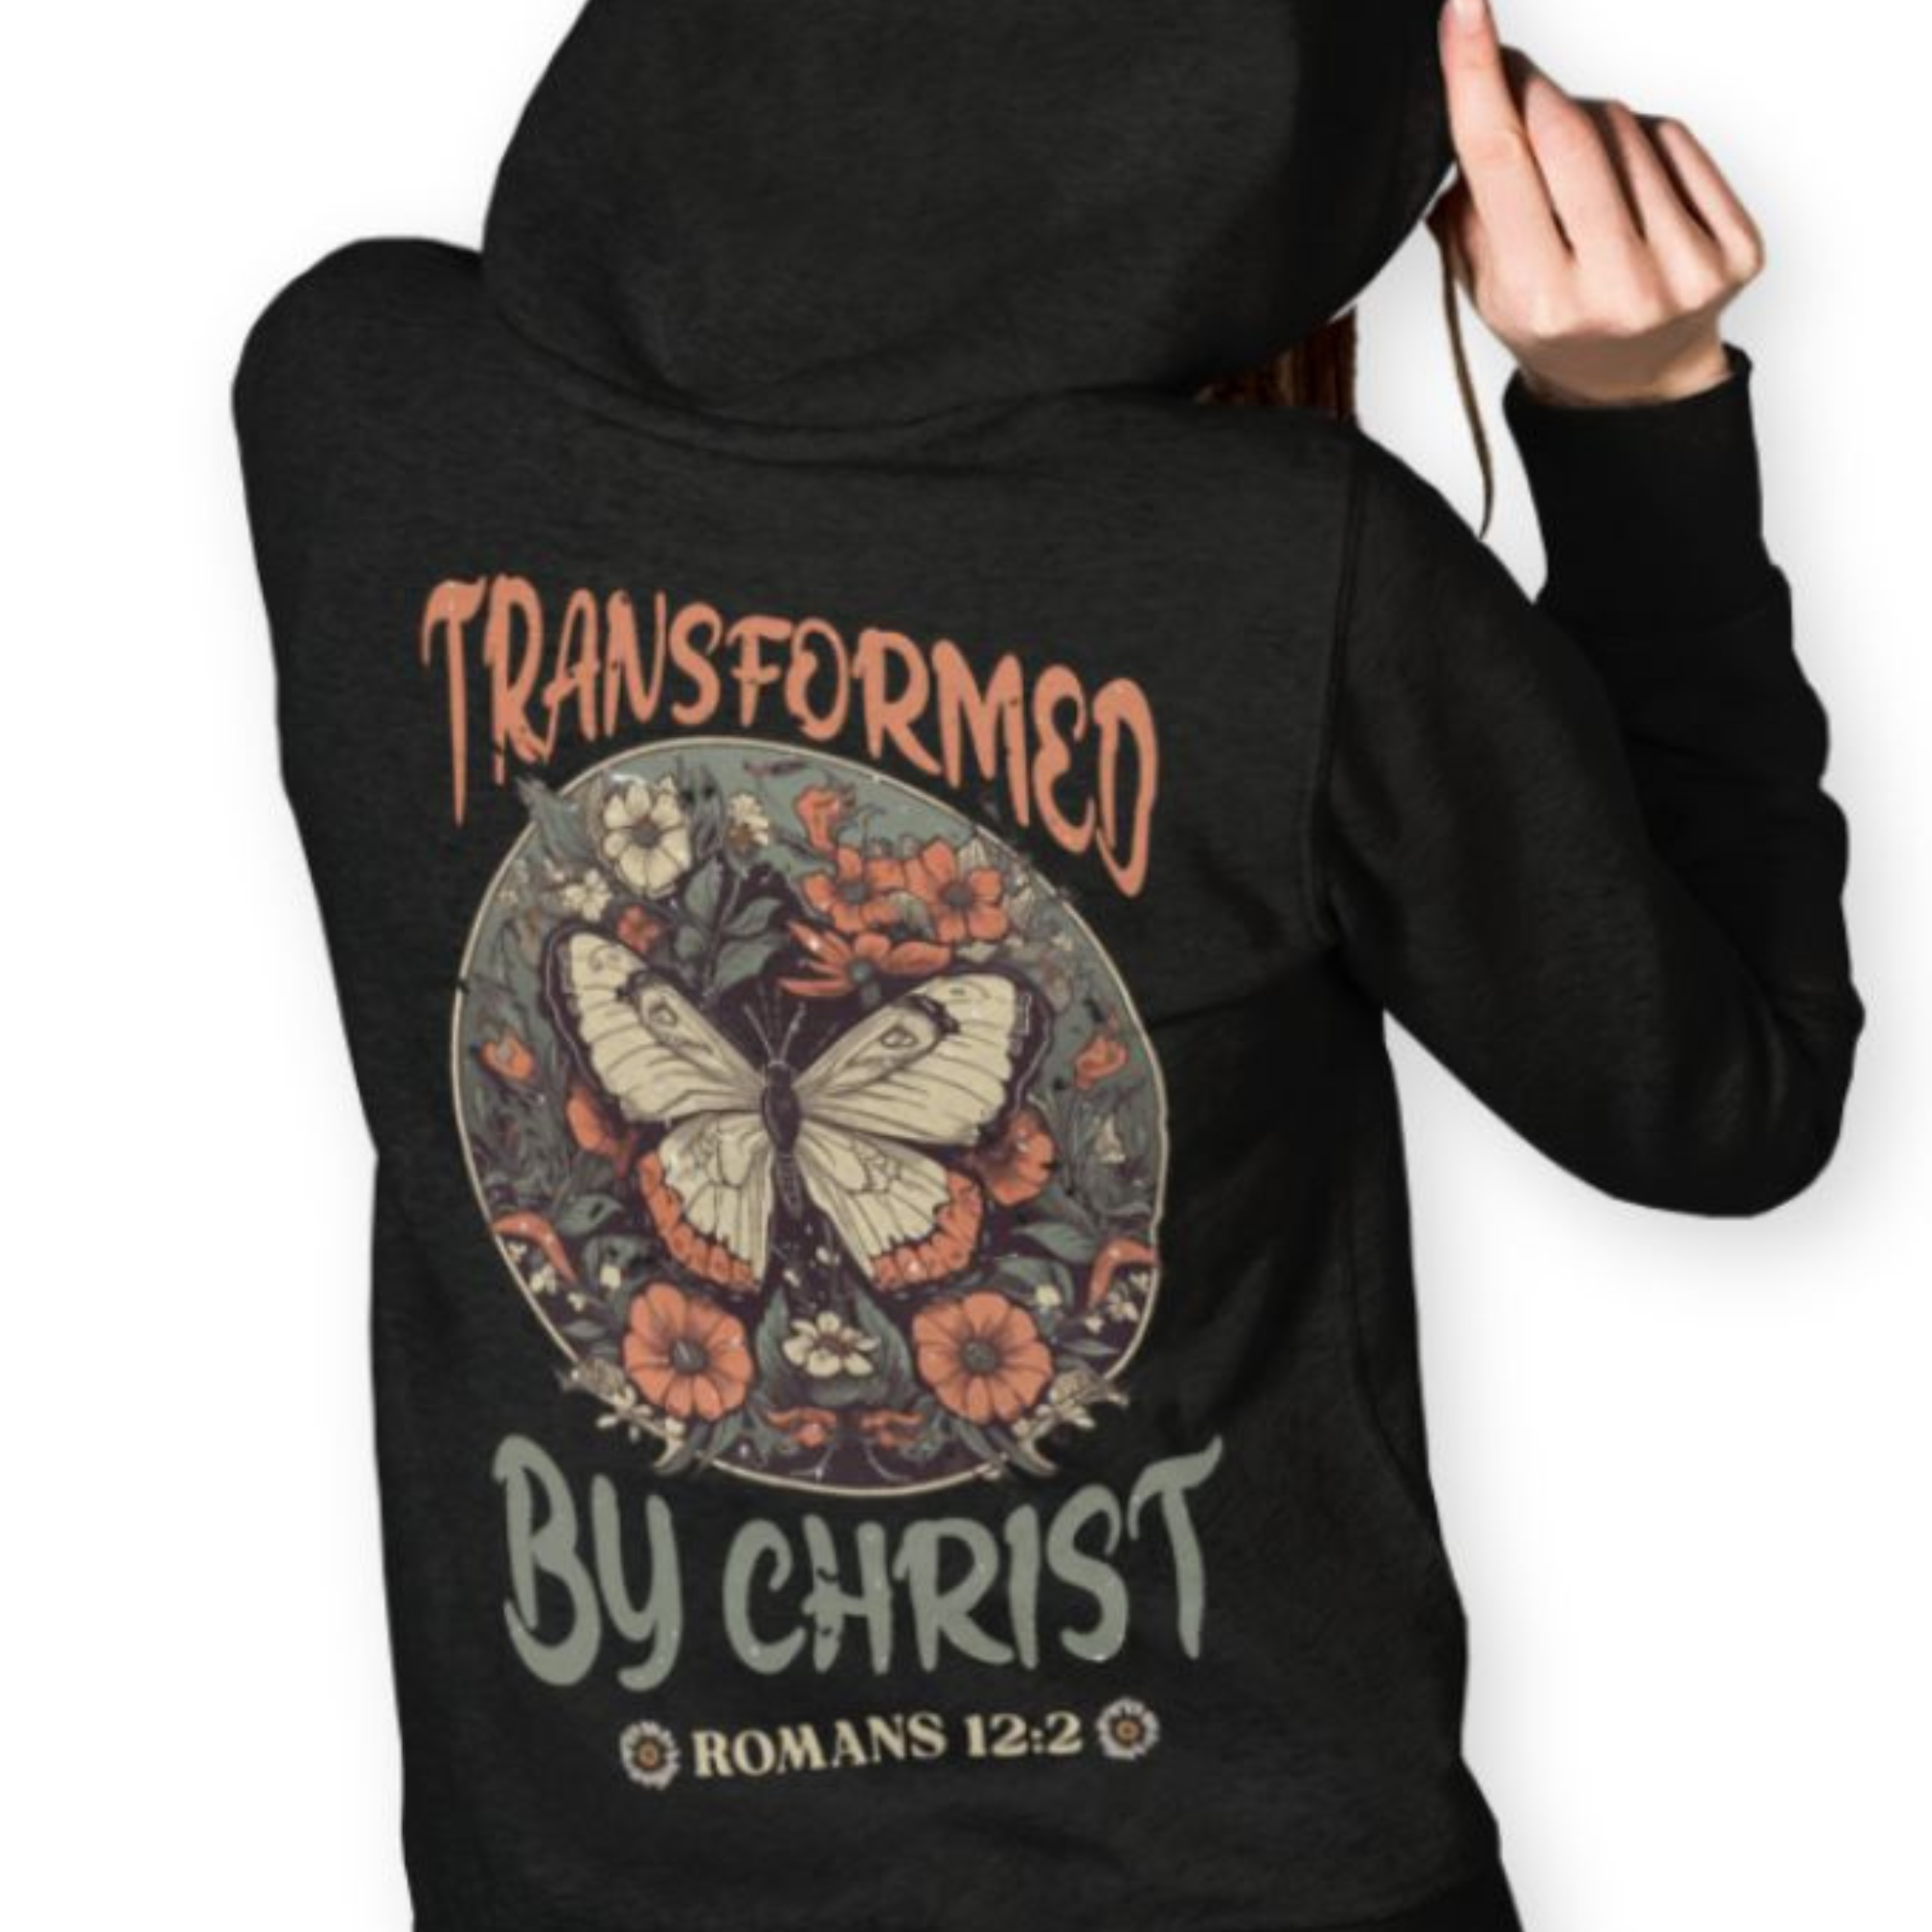 Transformed by Christ Retro-Inspired Women's Jacket Heavy Blend™ Full Zip Hooded Sweatshirt Size: S Color: Black Jesus Passion Apparel